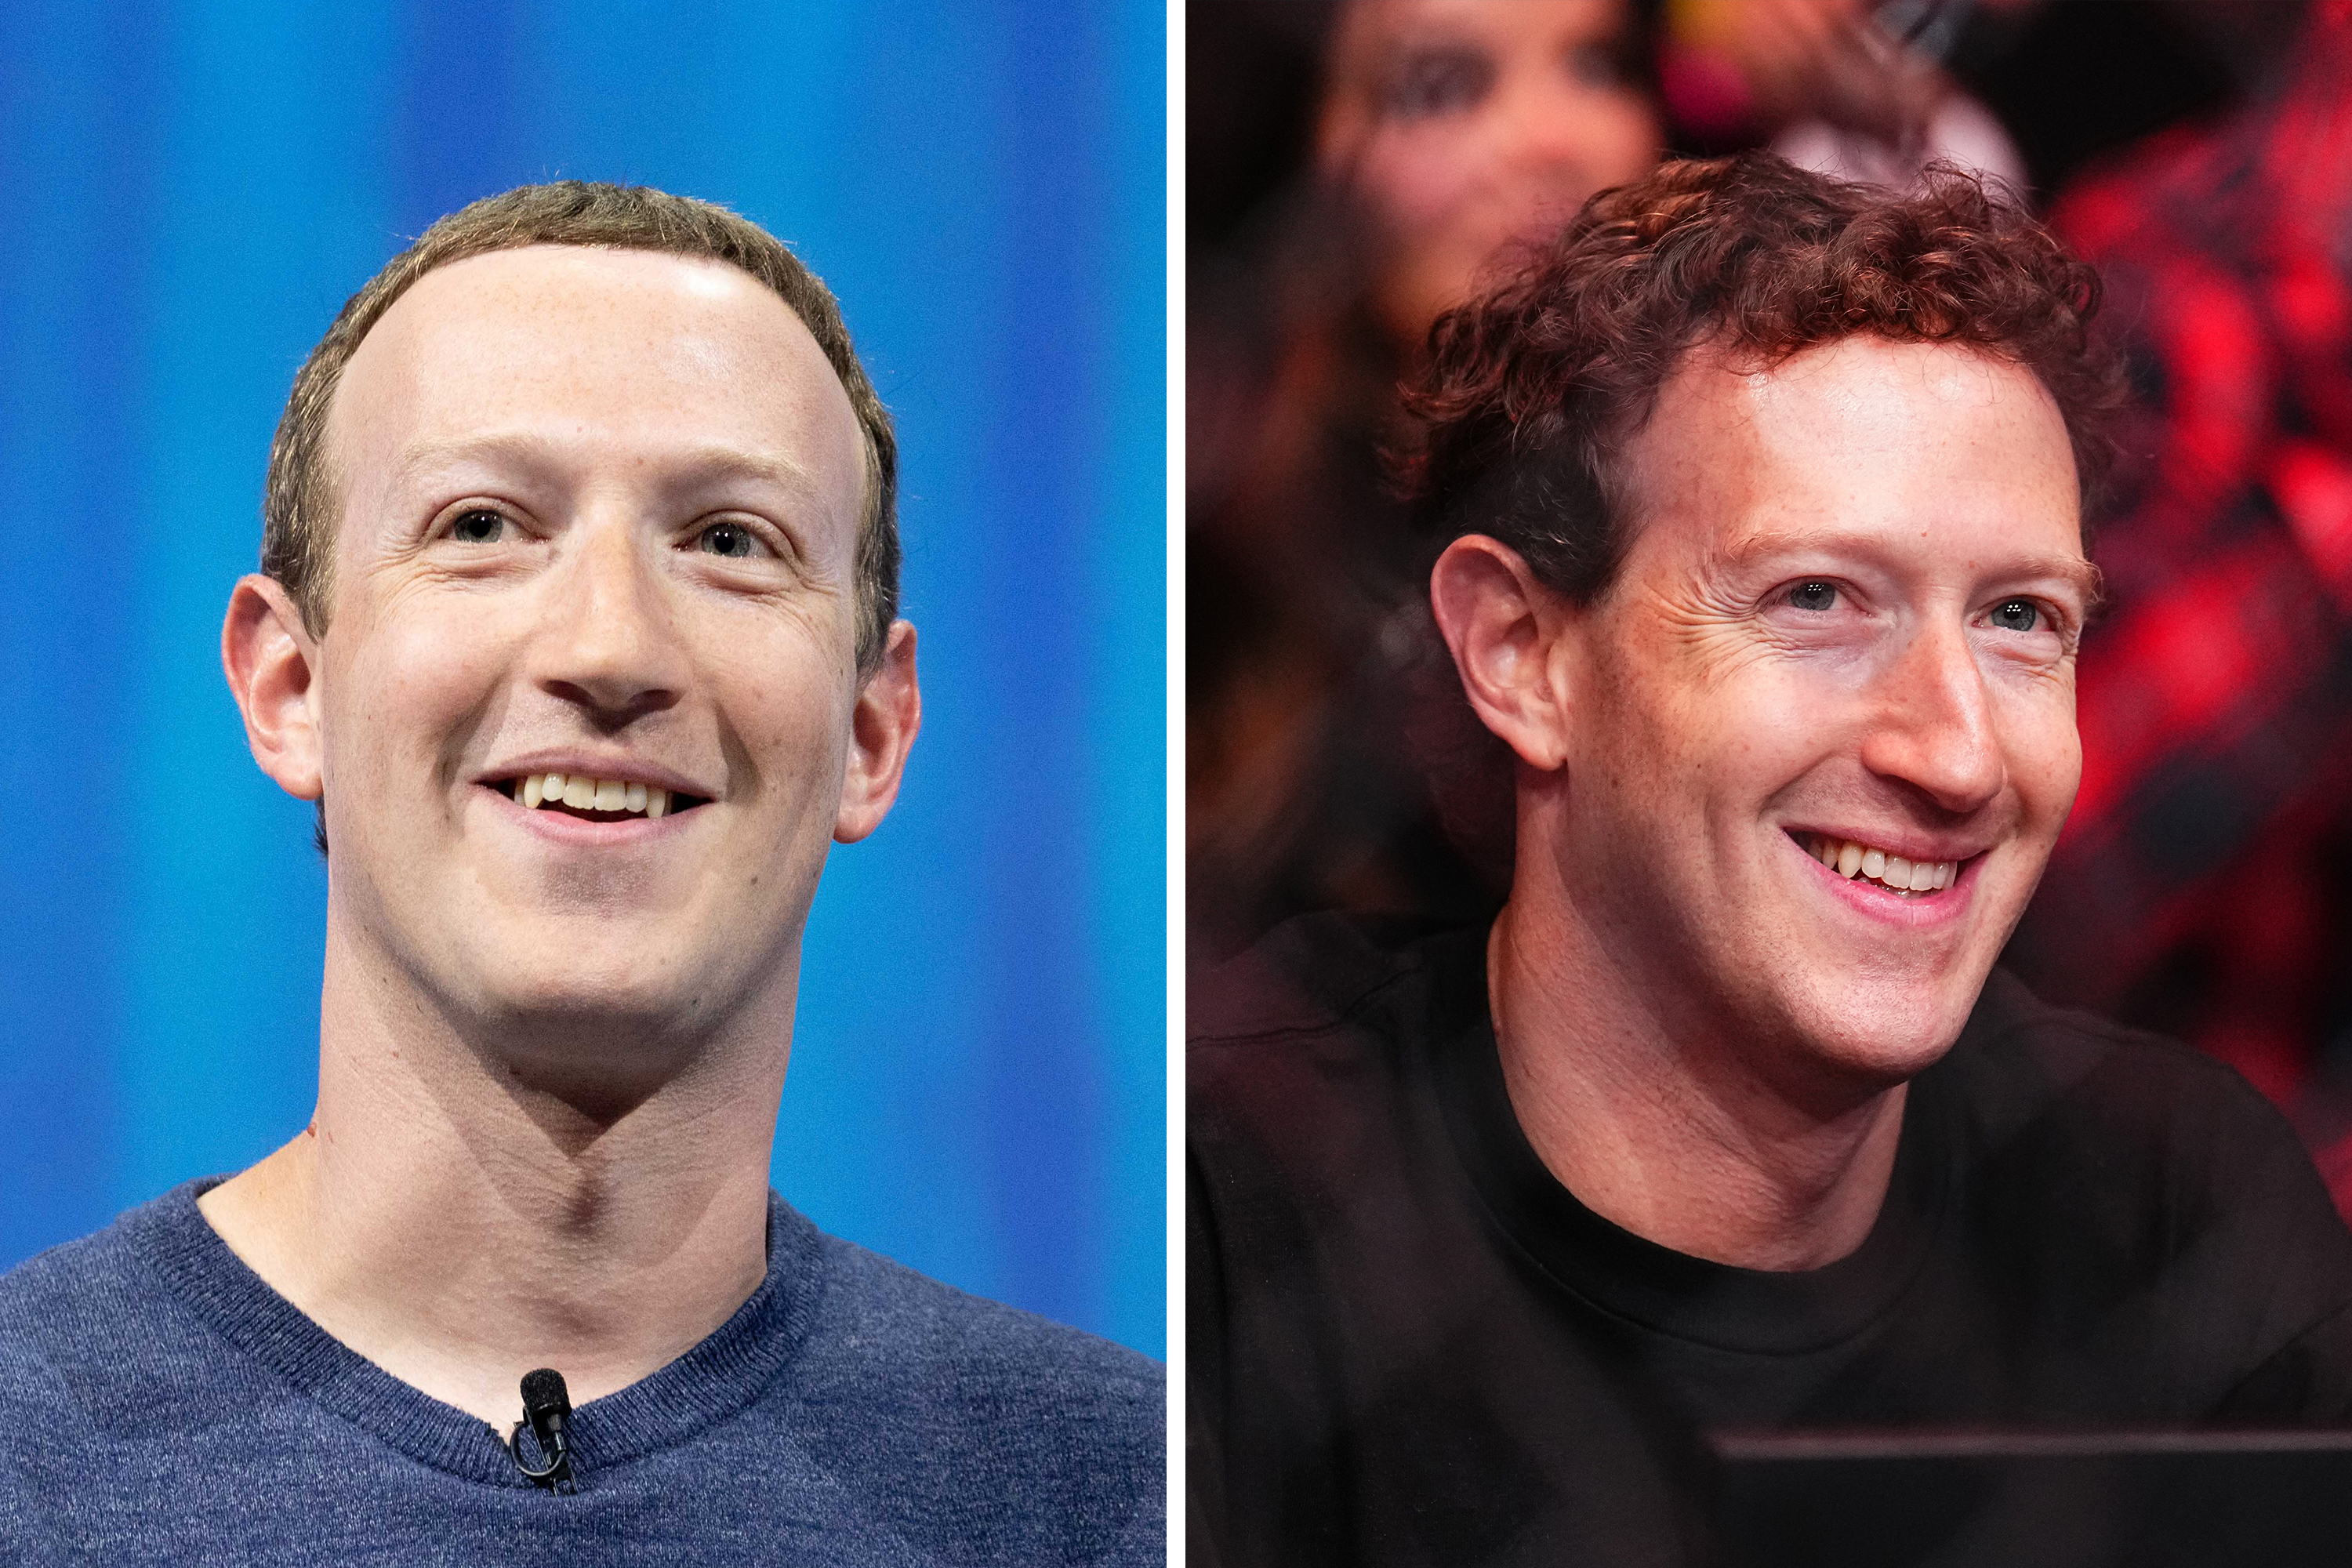 This image shows two photos side by side; both feature a smiling man with short brown hair, wearing casual clothing, against different backgrounds—one blue and one blurred.